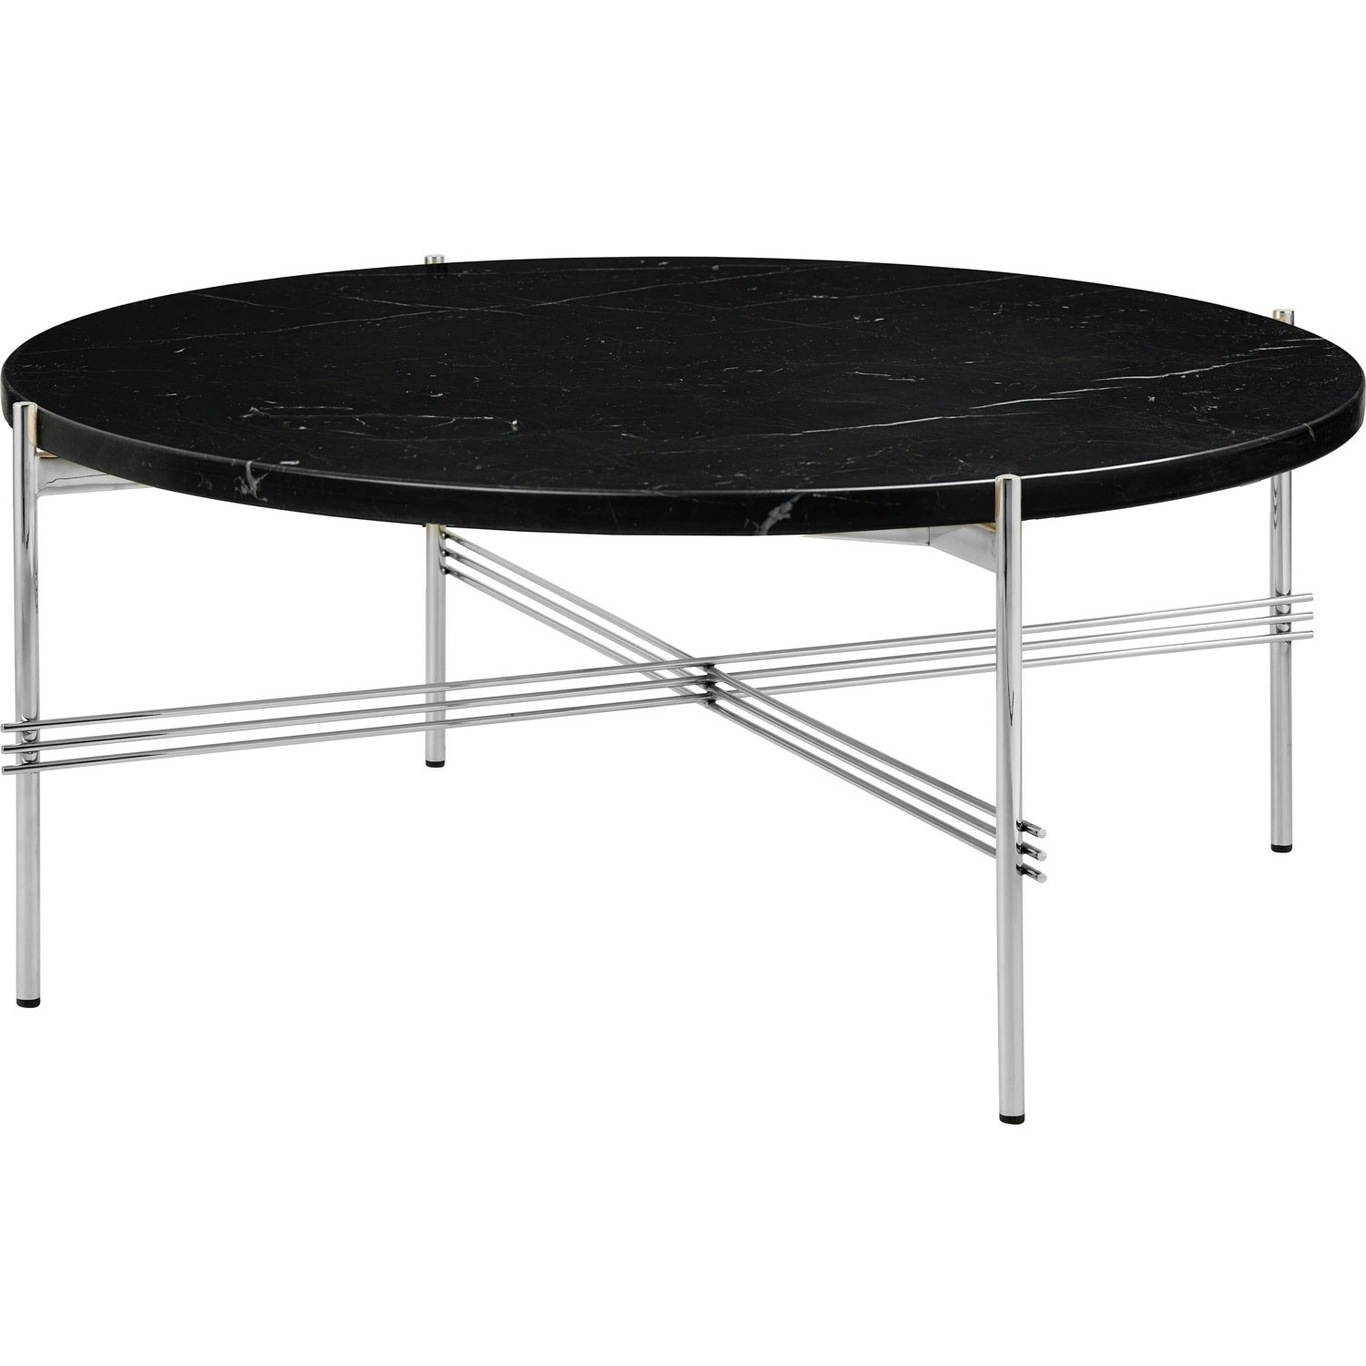 TS Coffee Table 80 cm, Polished Steel / Black Marquina marble